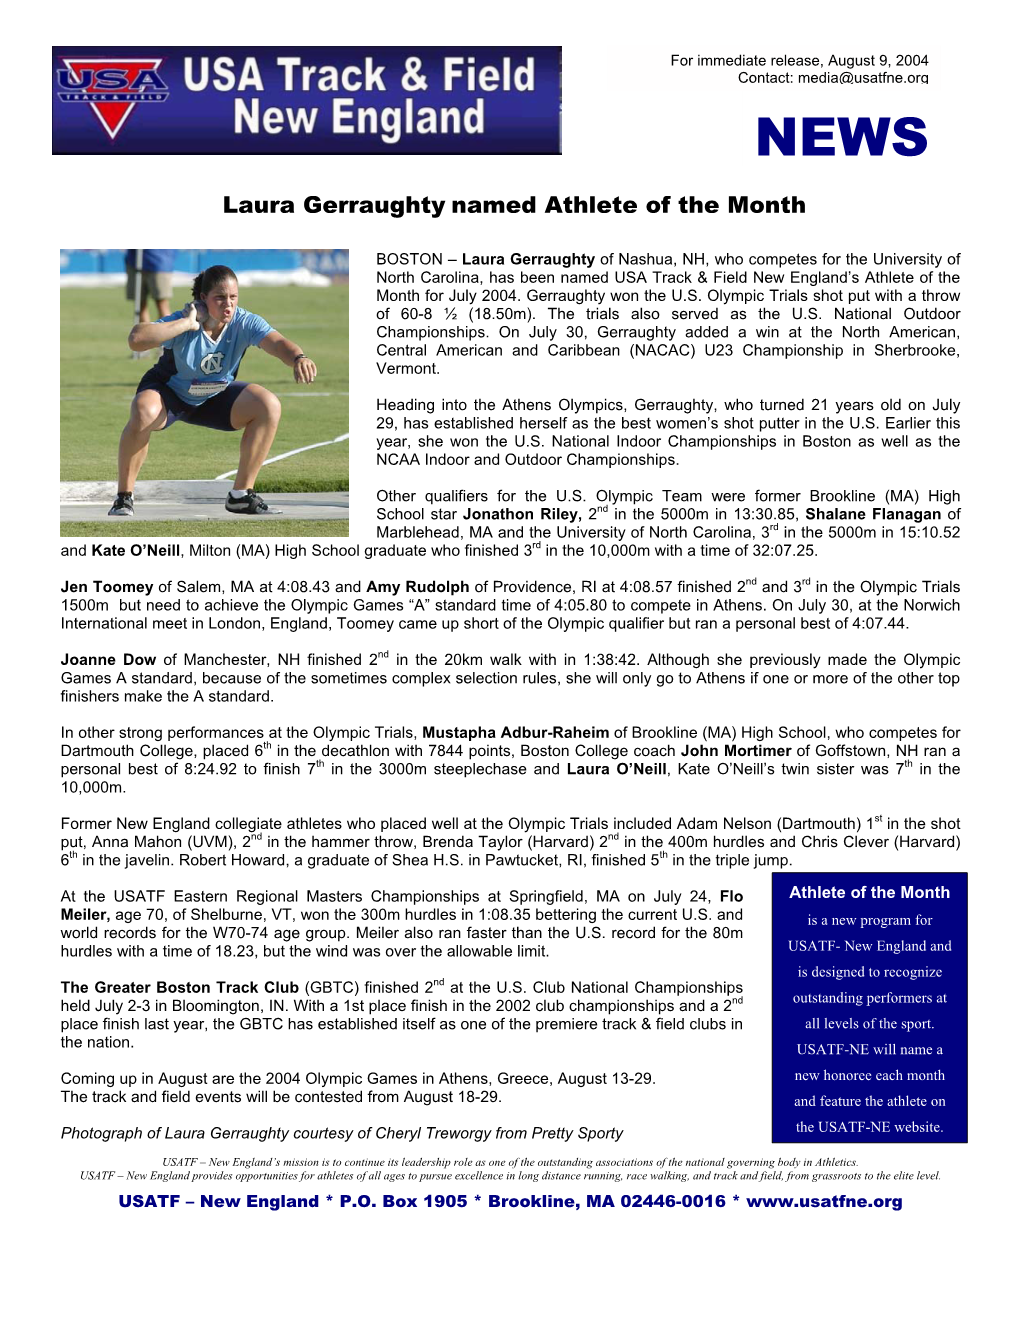 Laura Gerraughty Named Athlete of the Month